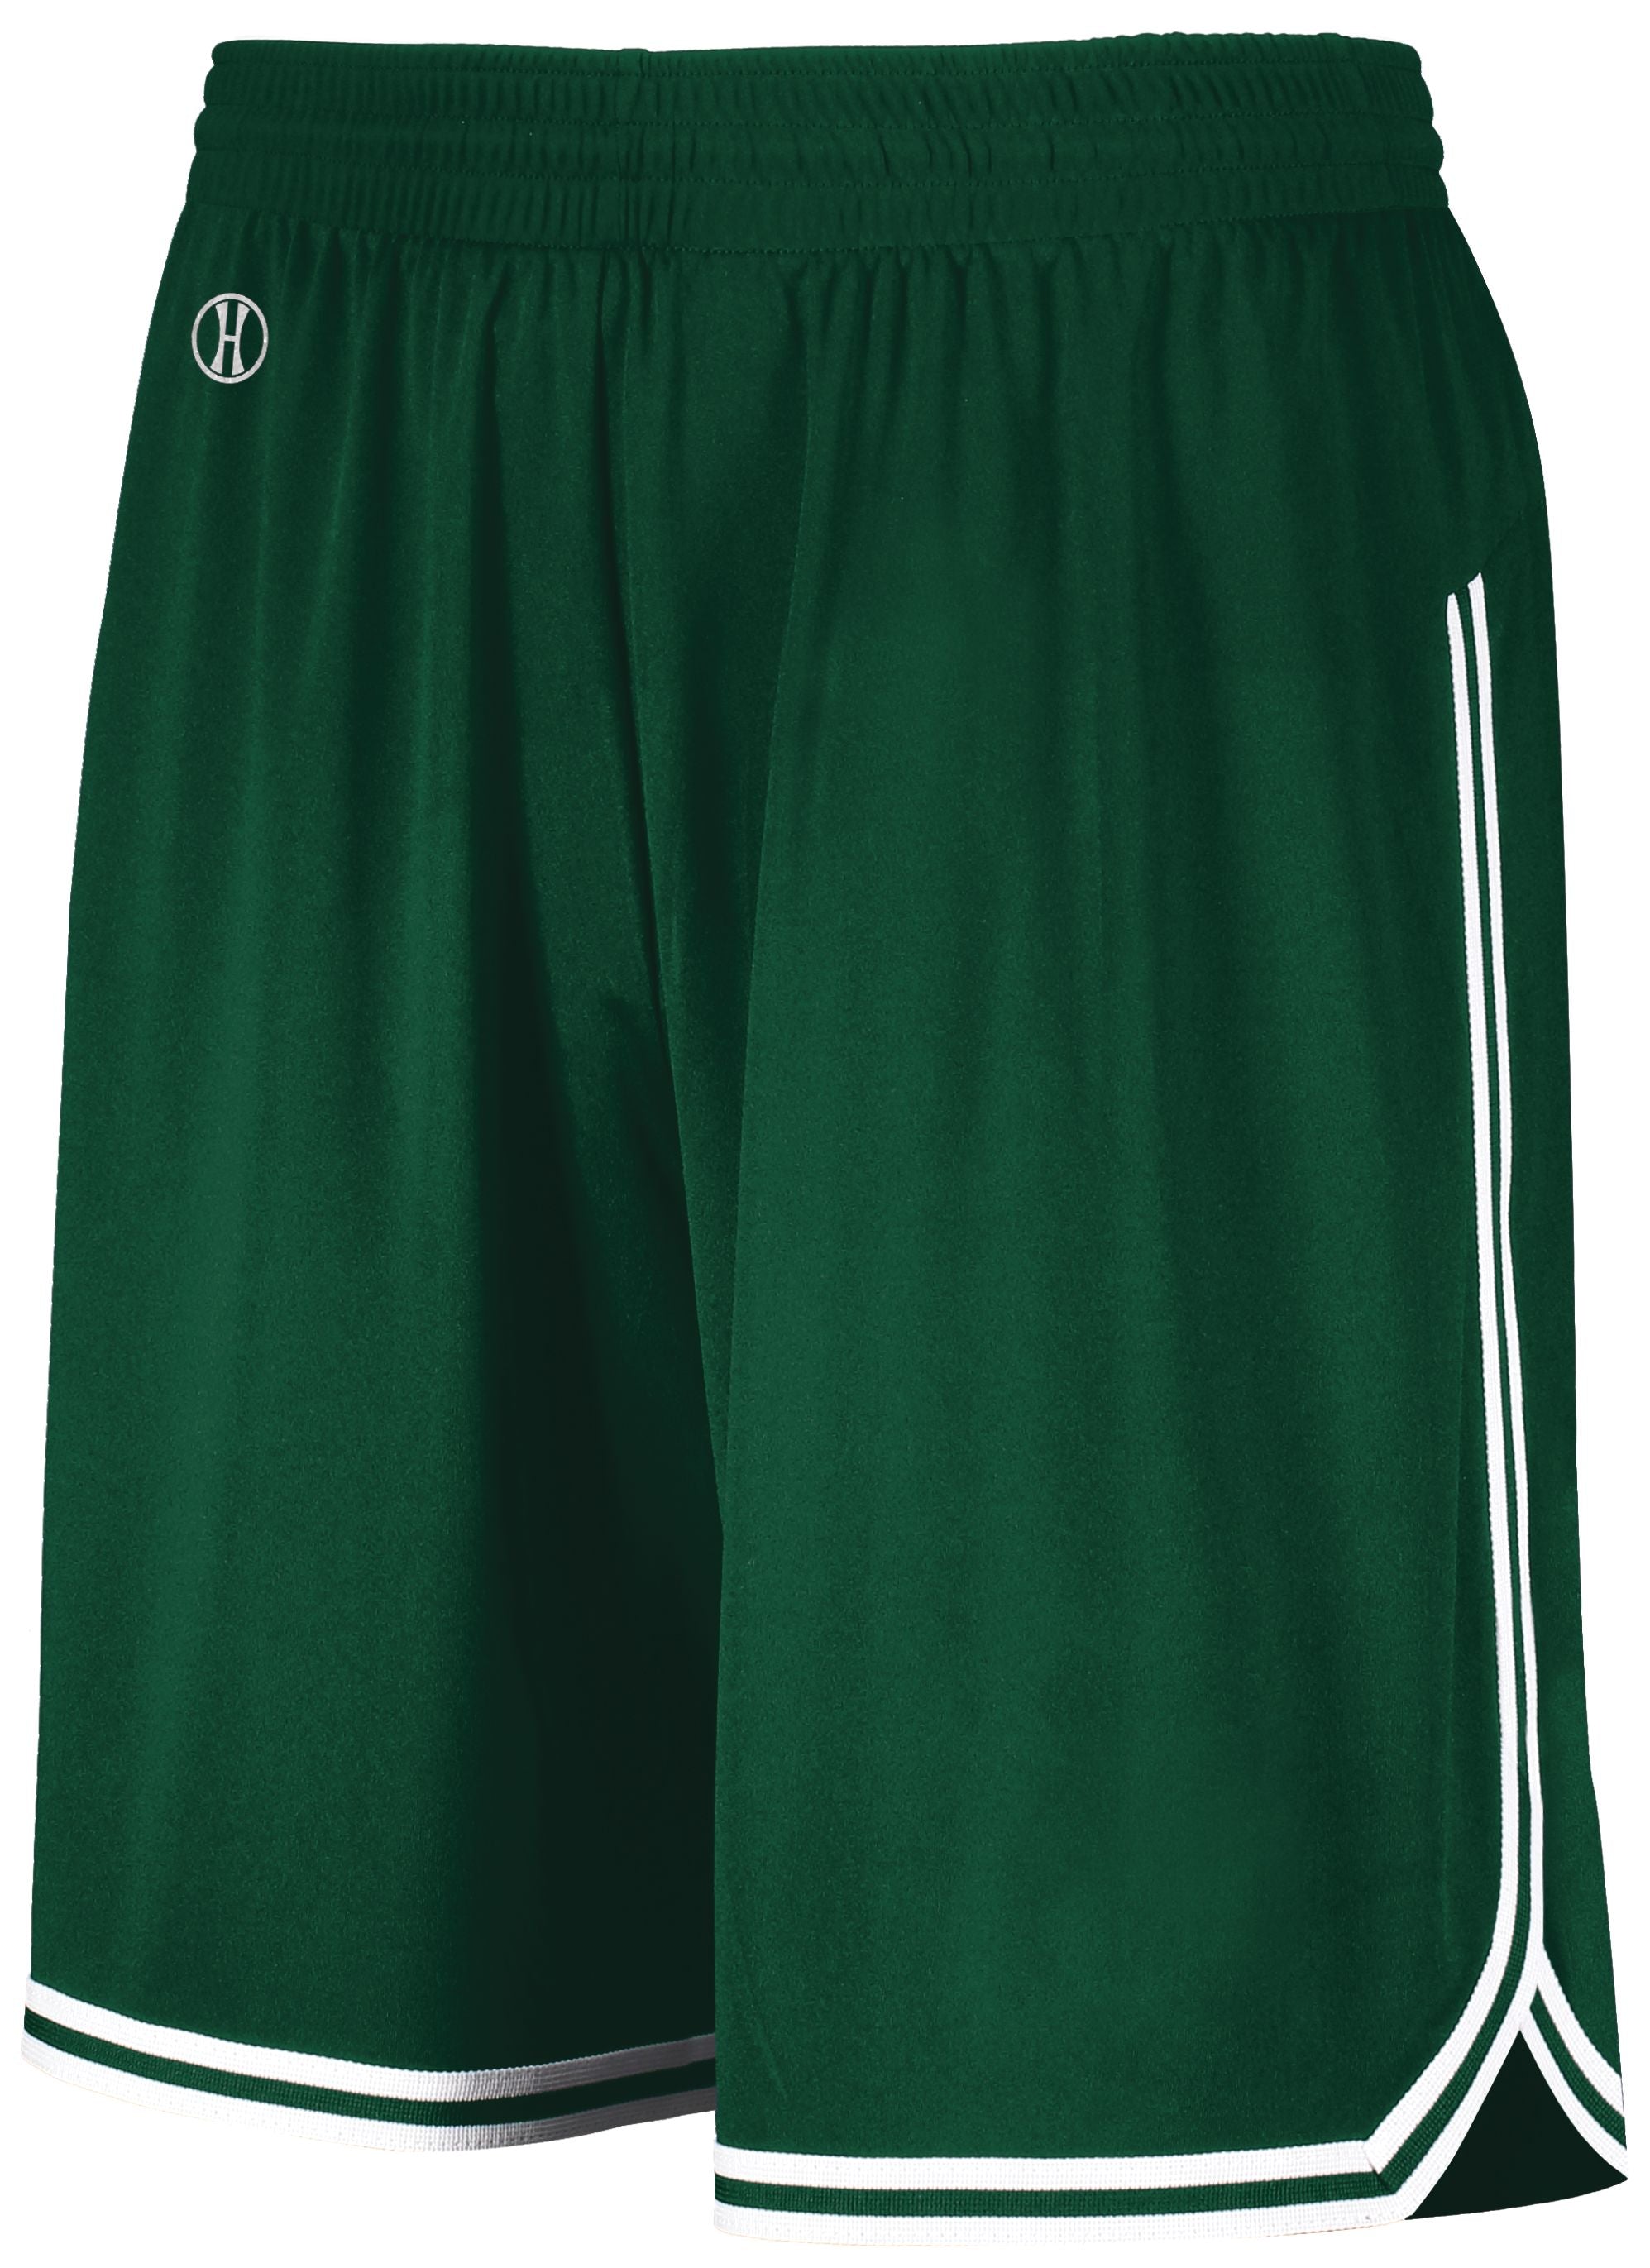 Holloway Retro Basketball Shorts in Forest/White  -Part of the Adult, Adult-Shorts, Basketball, Holloway, All-Sports, All-Sports-1 product lines at KanaleyCreations.com